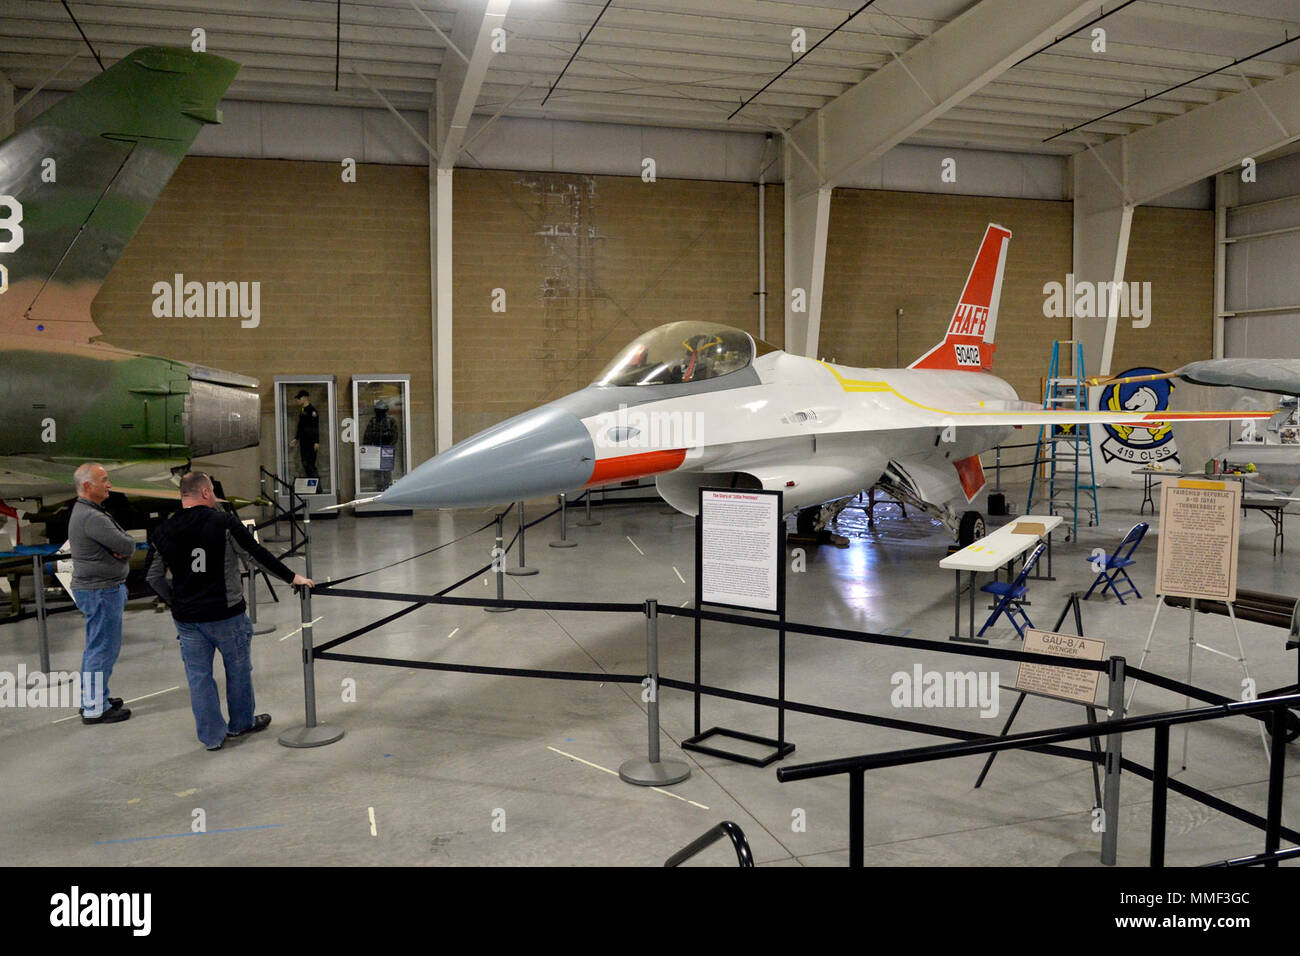 An F-16 test aircraft sits on display at the Hill Aerospace Museum